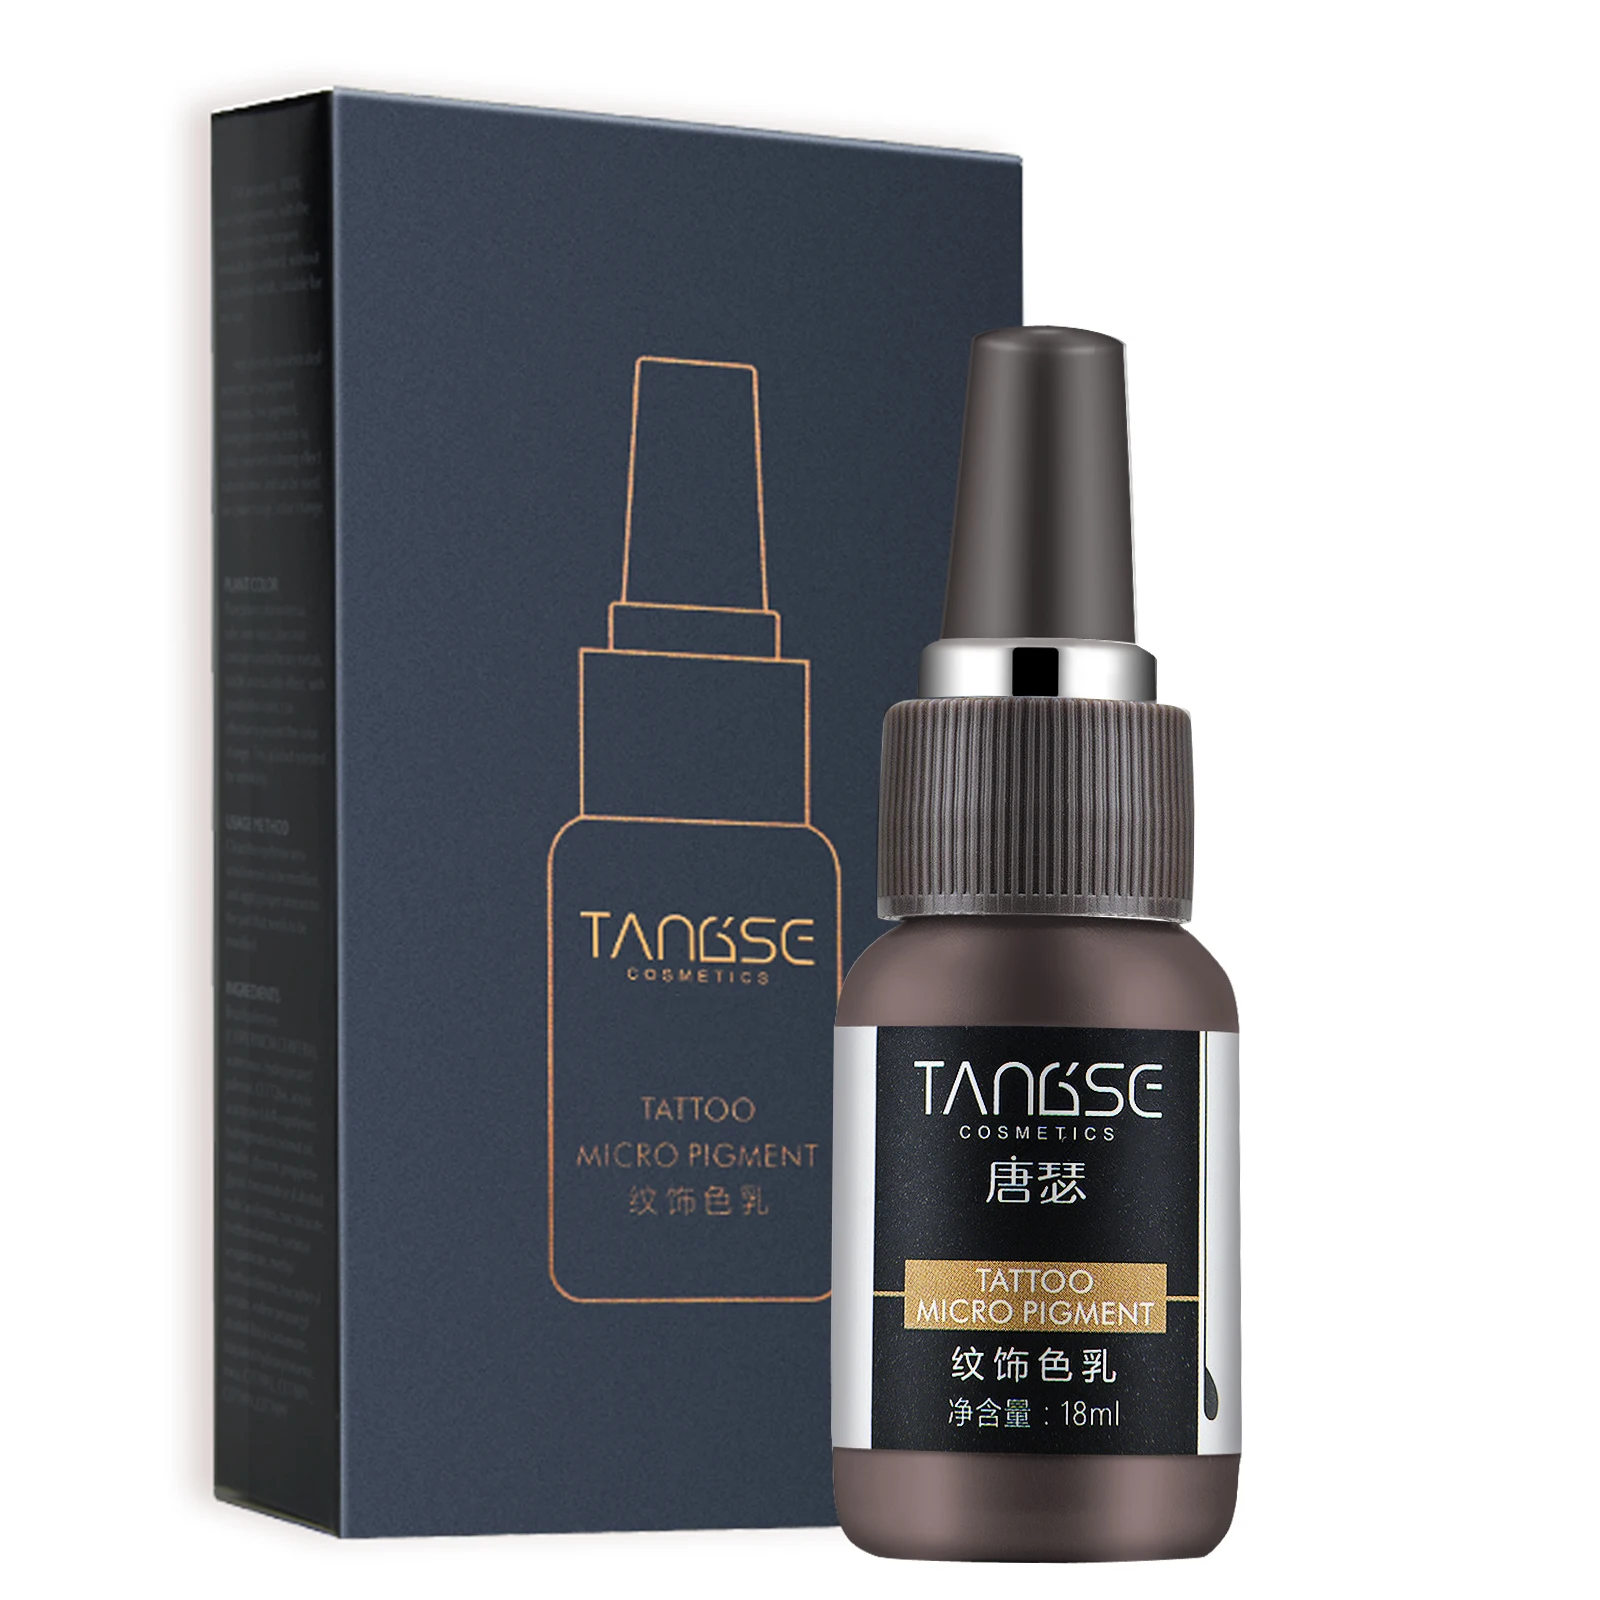 TANGSE 18ml//Bottle Microblading Tattoo Pigment Inks Semi Permanent Makeup Supplies For Eyebrow Lips Eyeliner Pigments